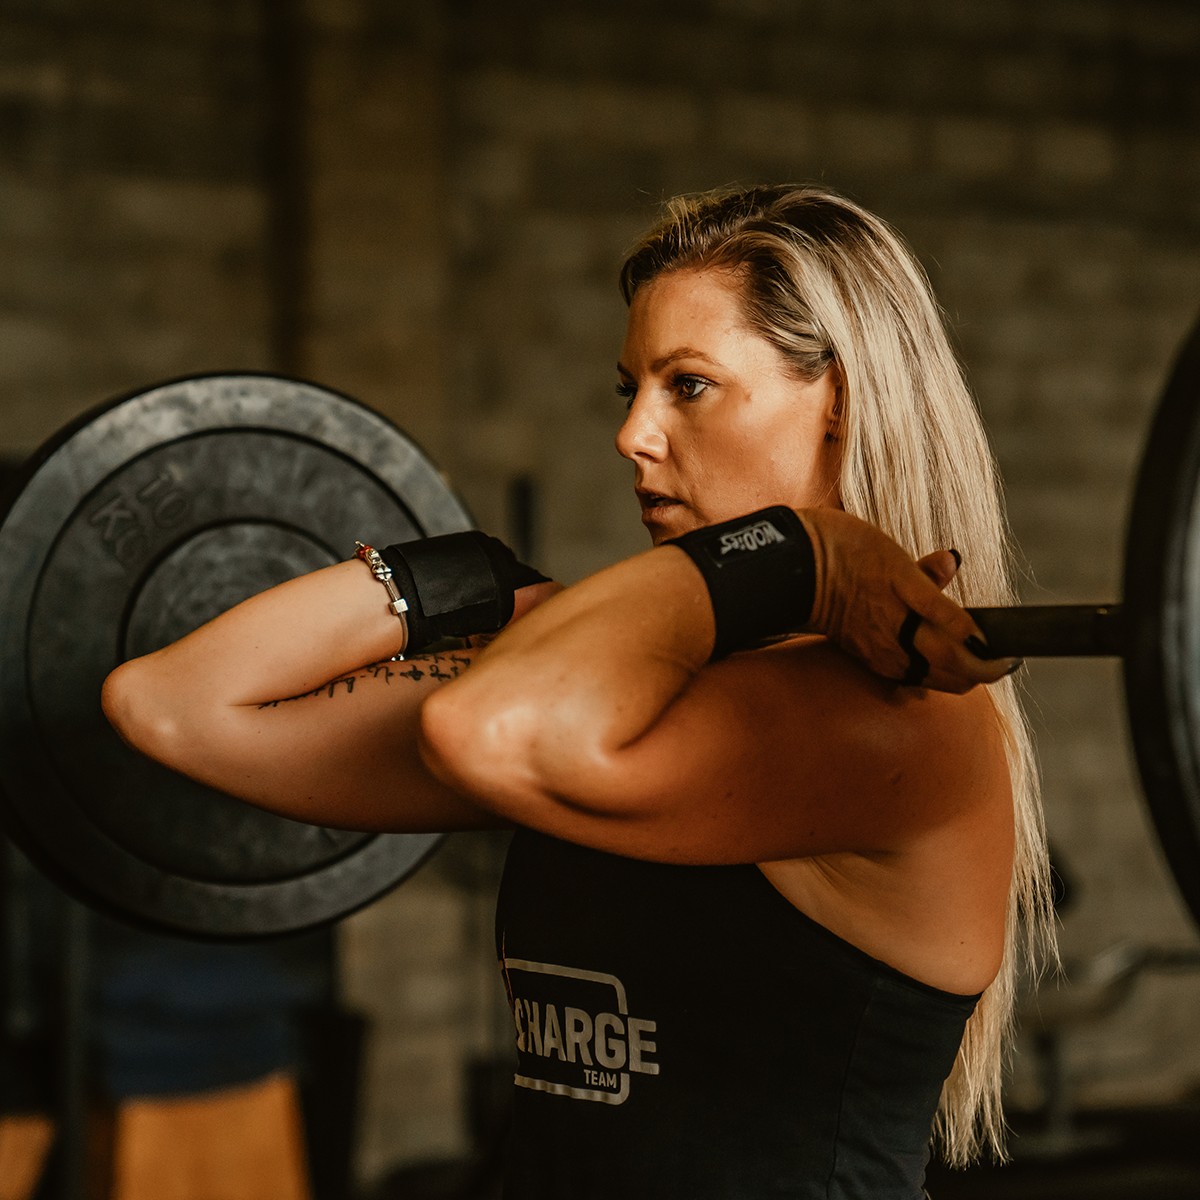 Going through your cues step-by-step in your head, visualizing your lifts and having the same setup routine before squatting will really help you remain consistent with your lifts.